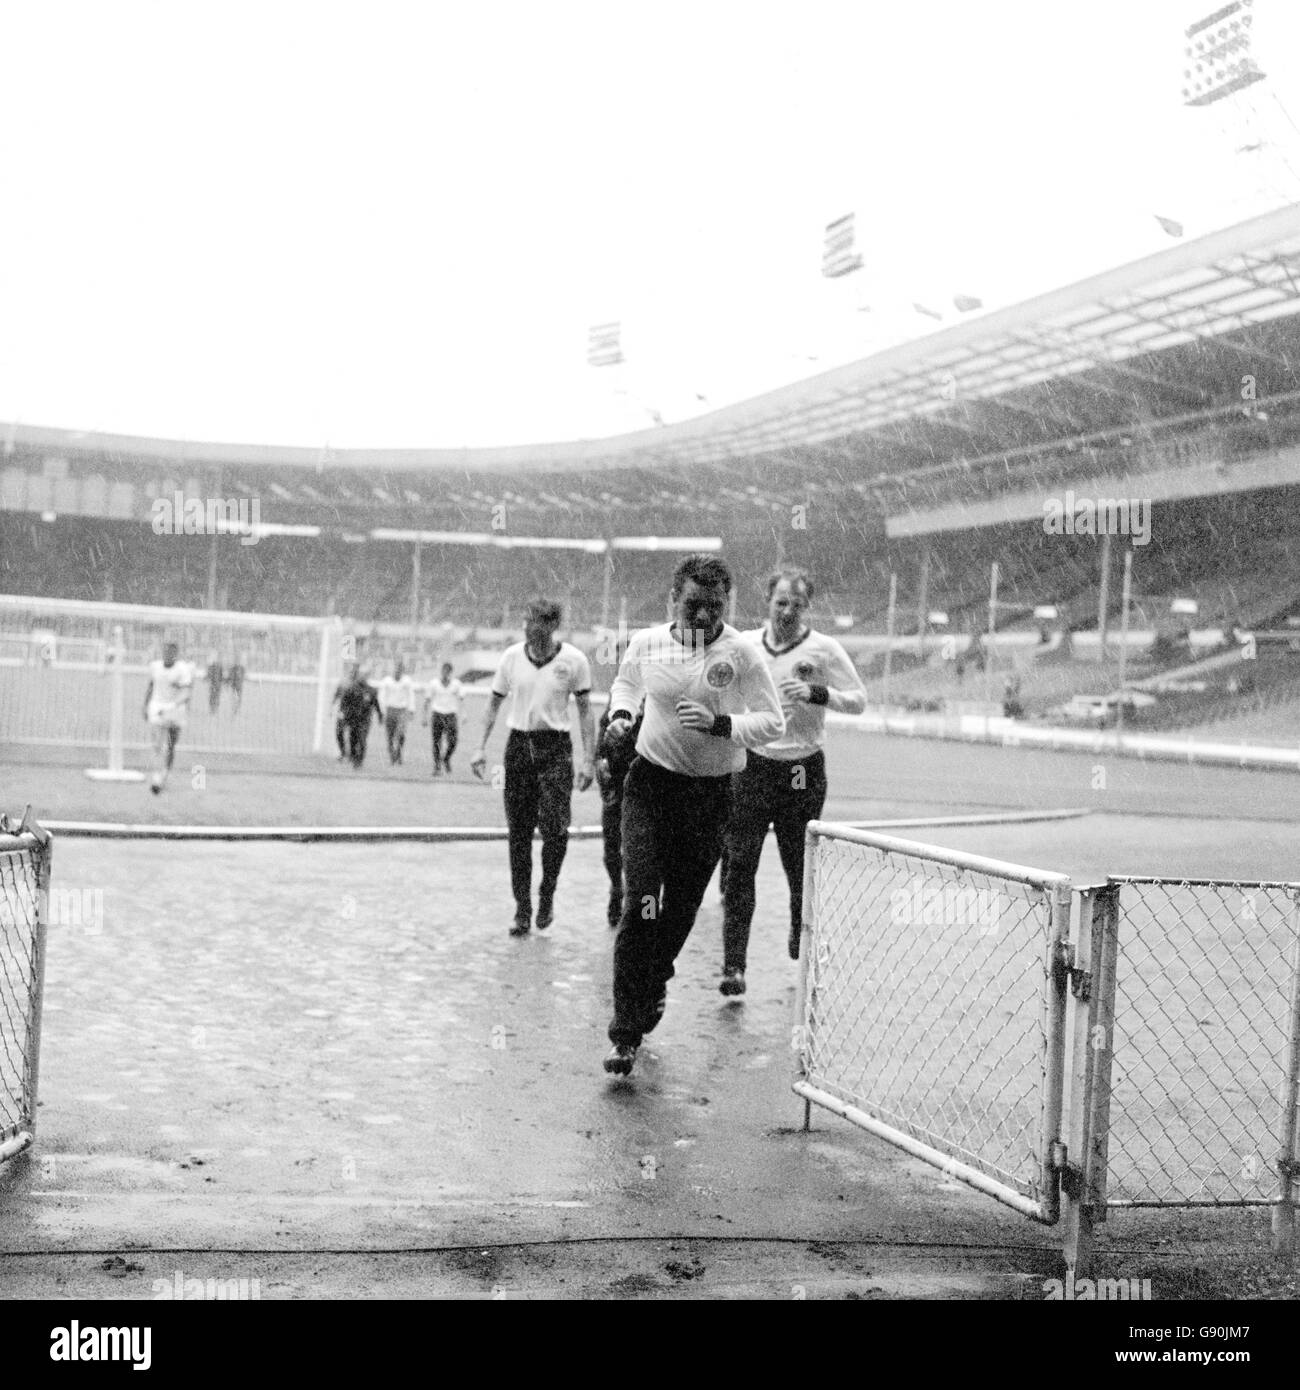 West Germany players run off the pitch as a thunder storm breaks out above. They were training ahead of the World Cup Final against England the next day. Stock Photo